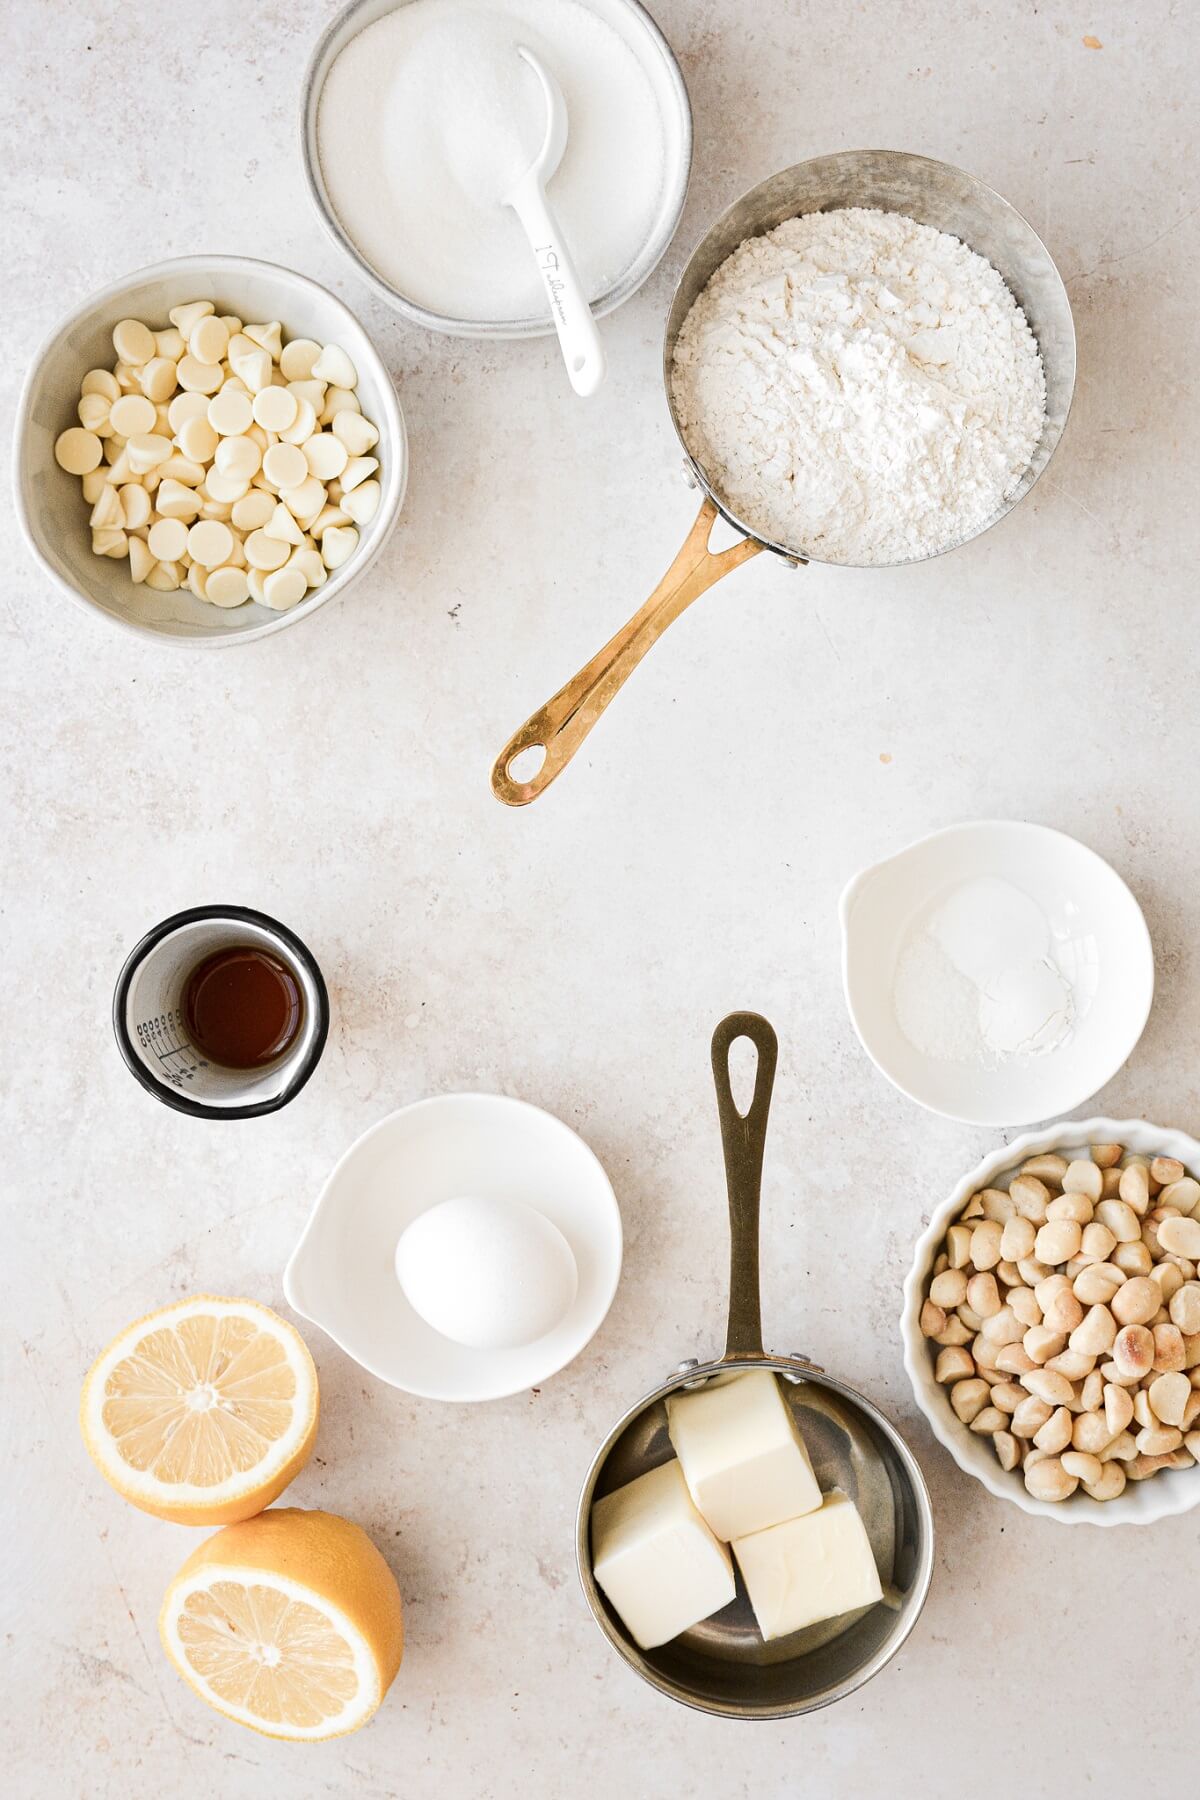 Ingredients for making soft lemon cookies with macadamia nuts and white chocolate chips.